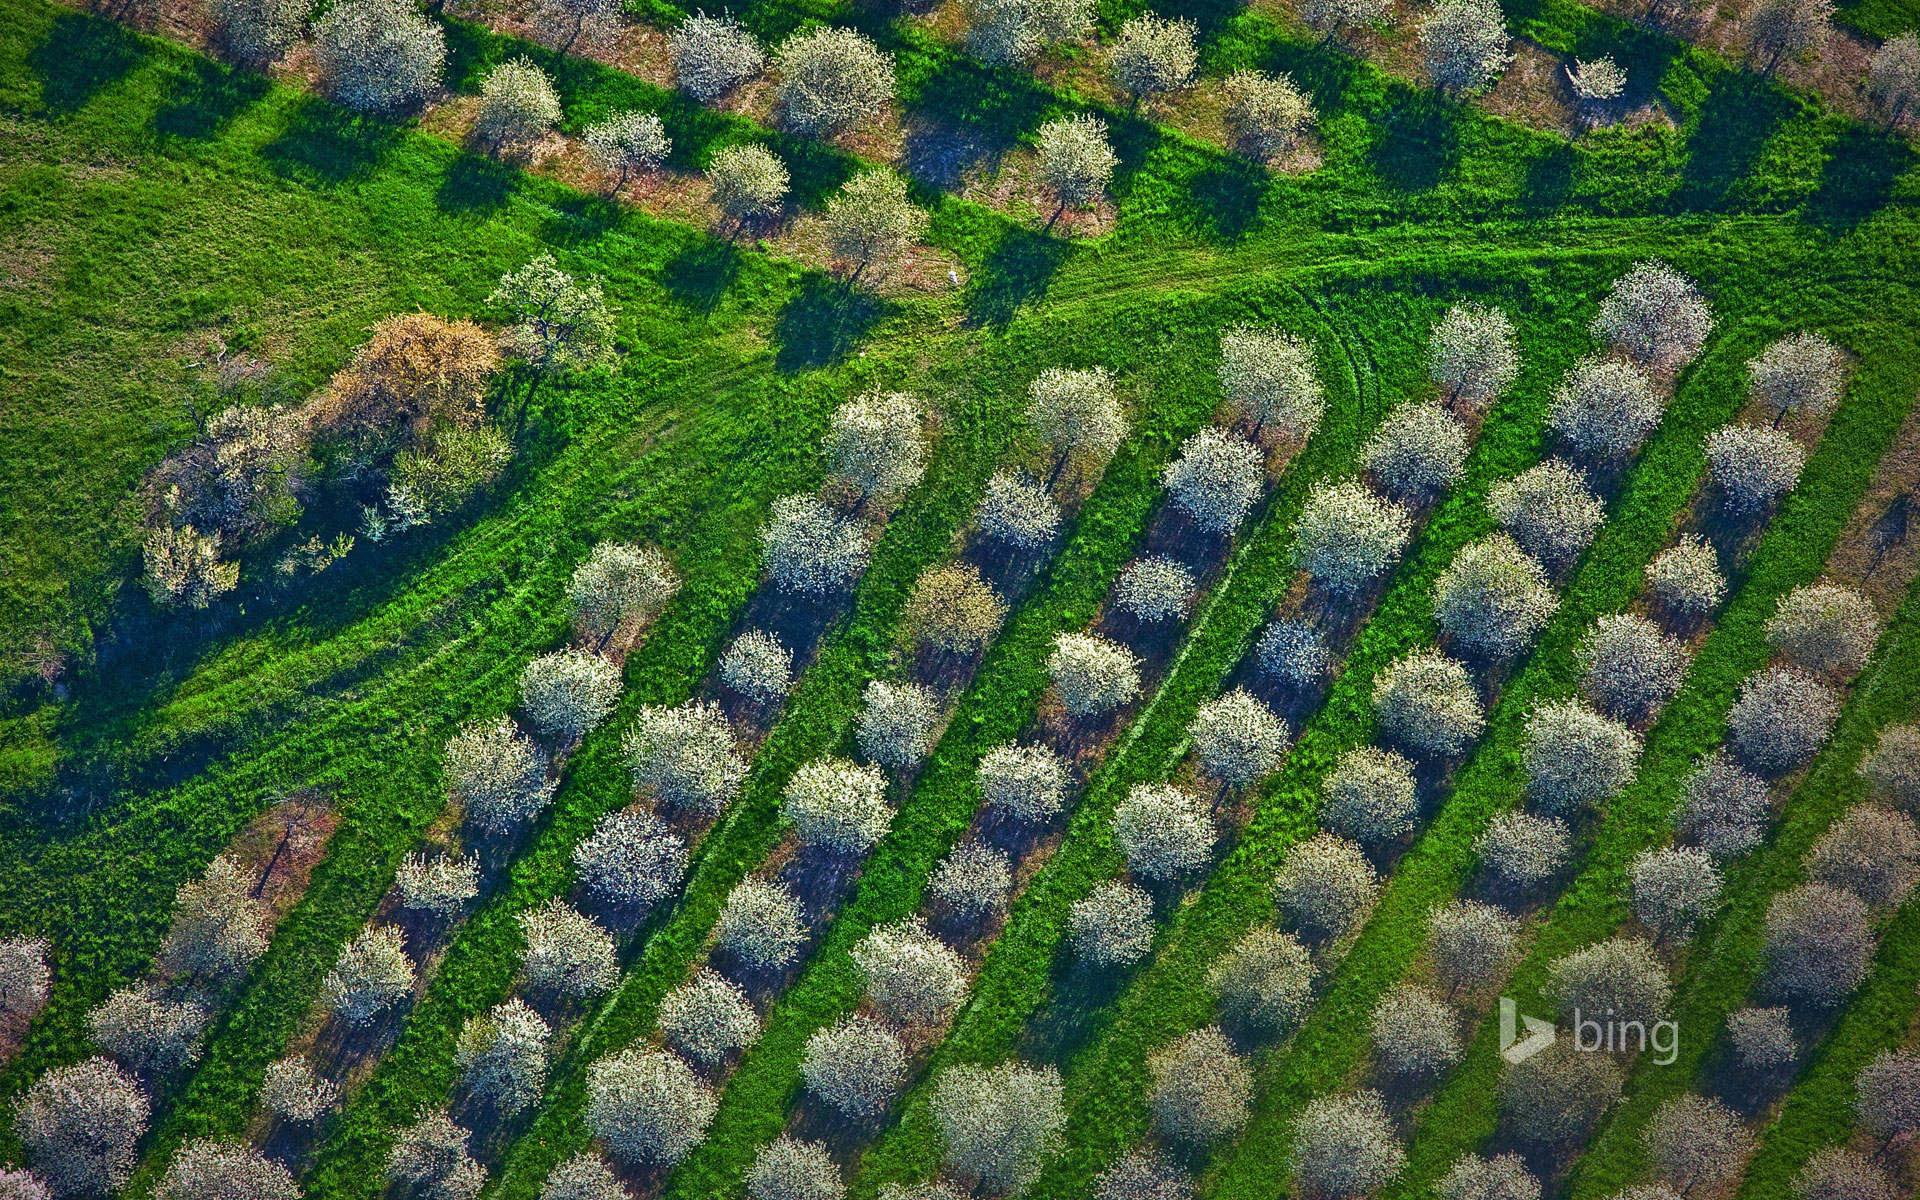 Cherry orchards bloom in Mason County, Michigan